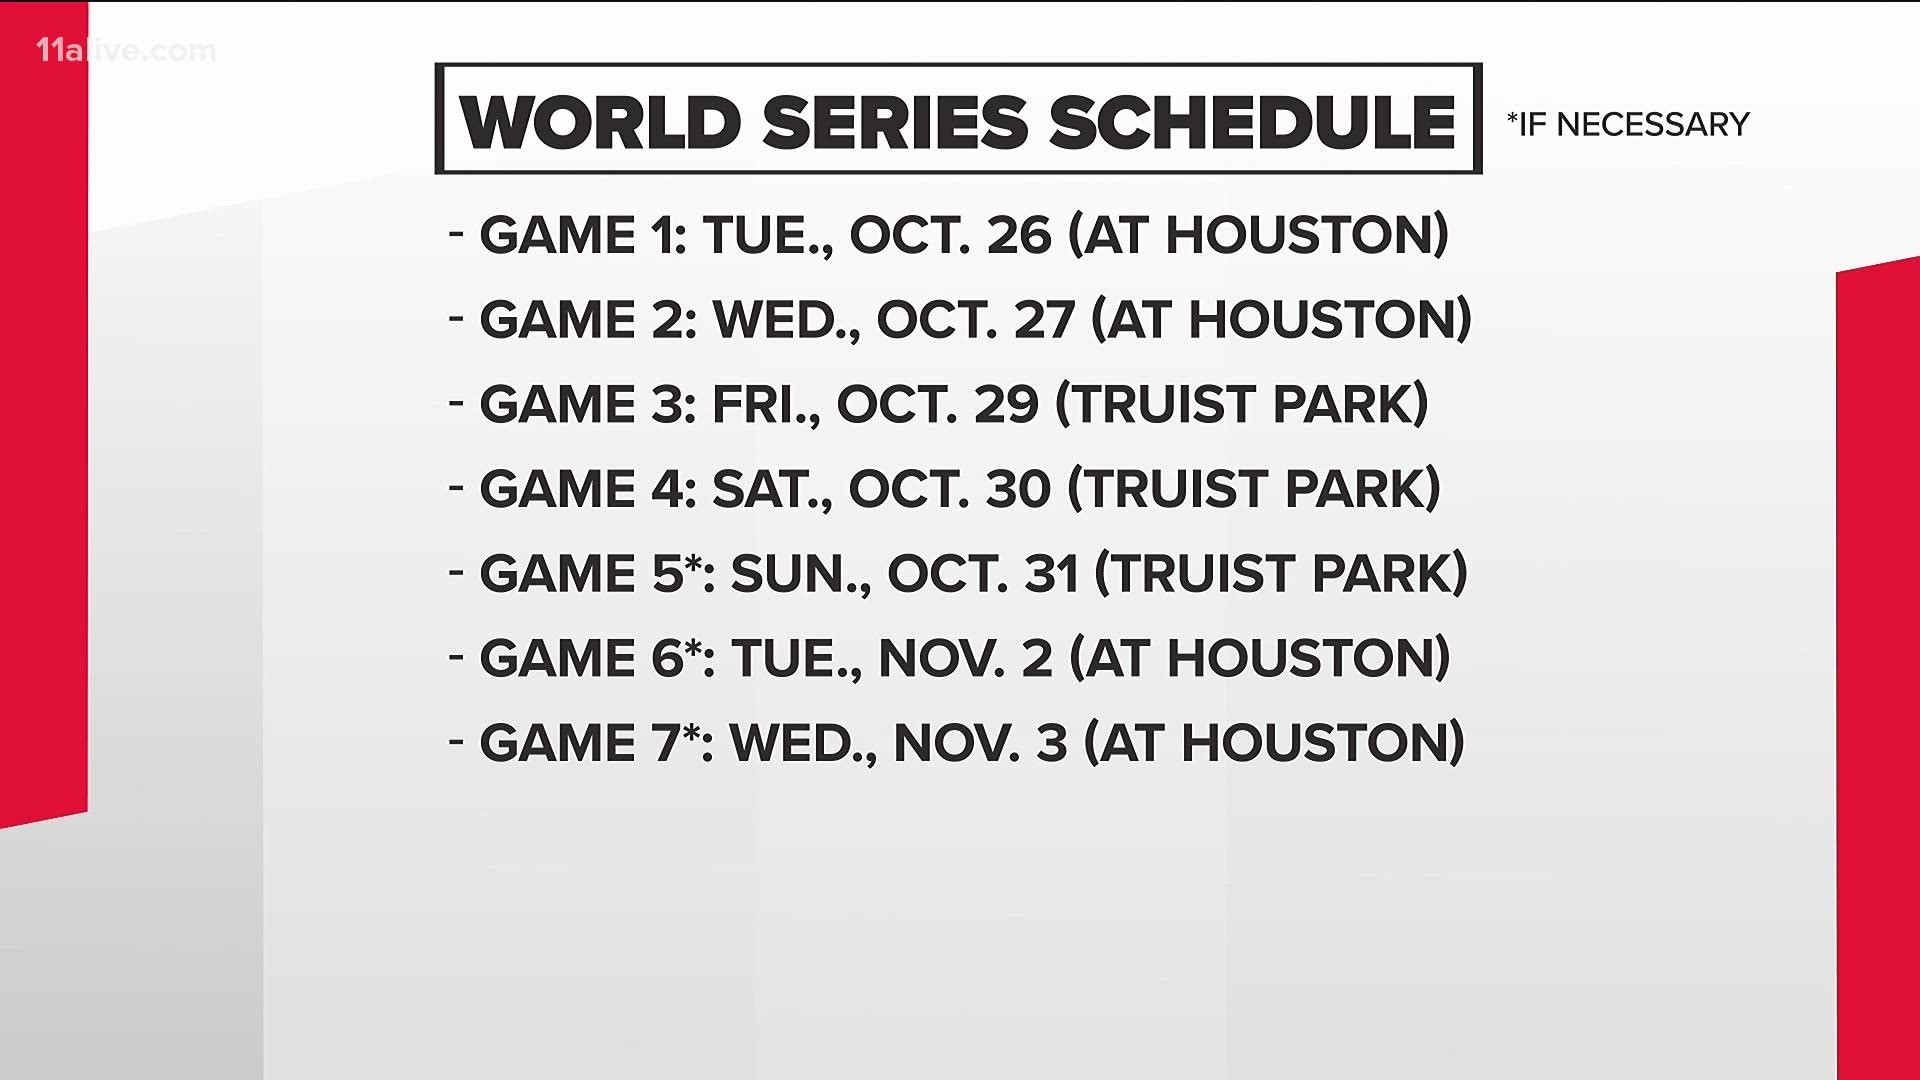 This is the 2021 World Series schedule.